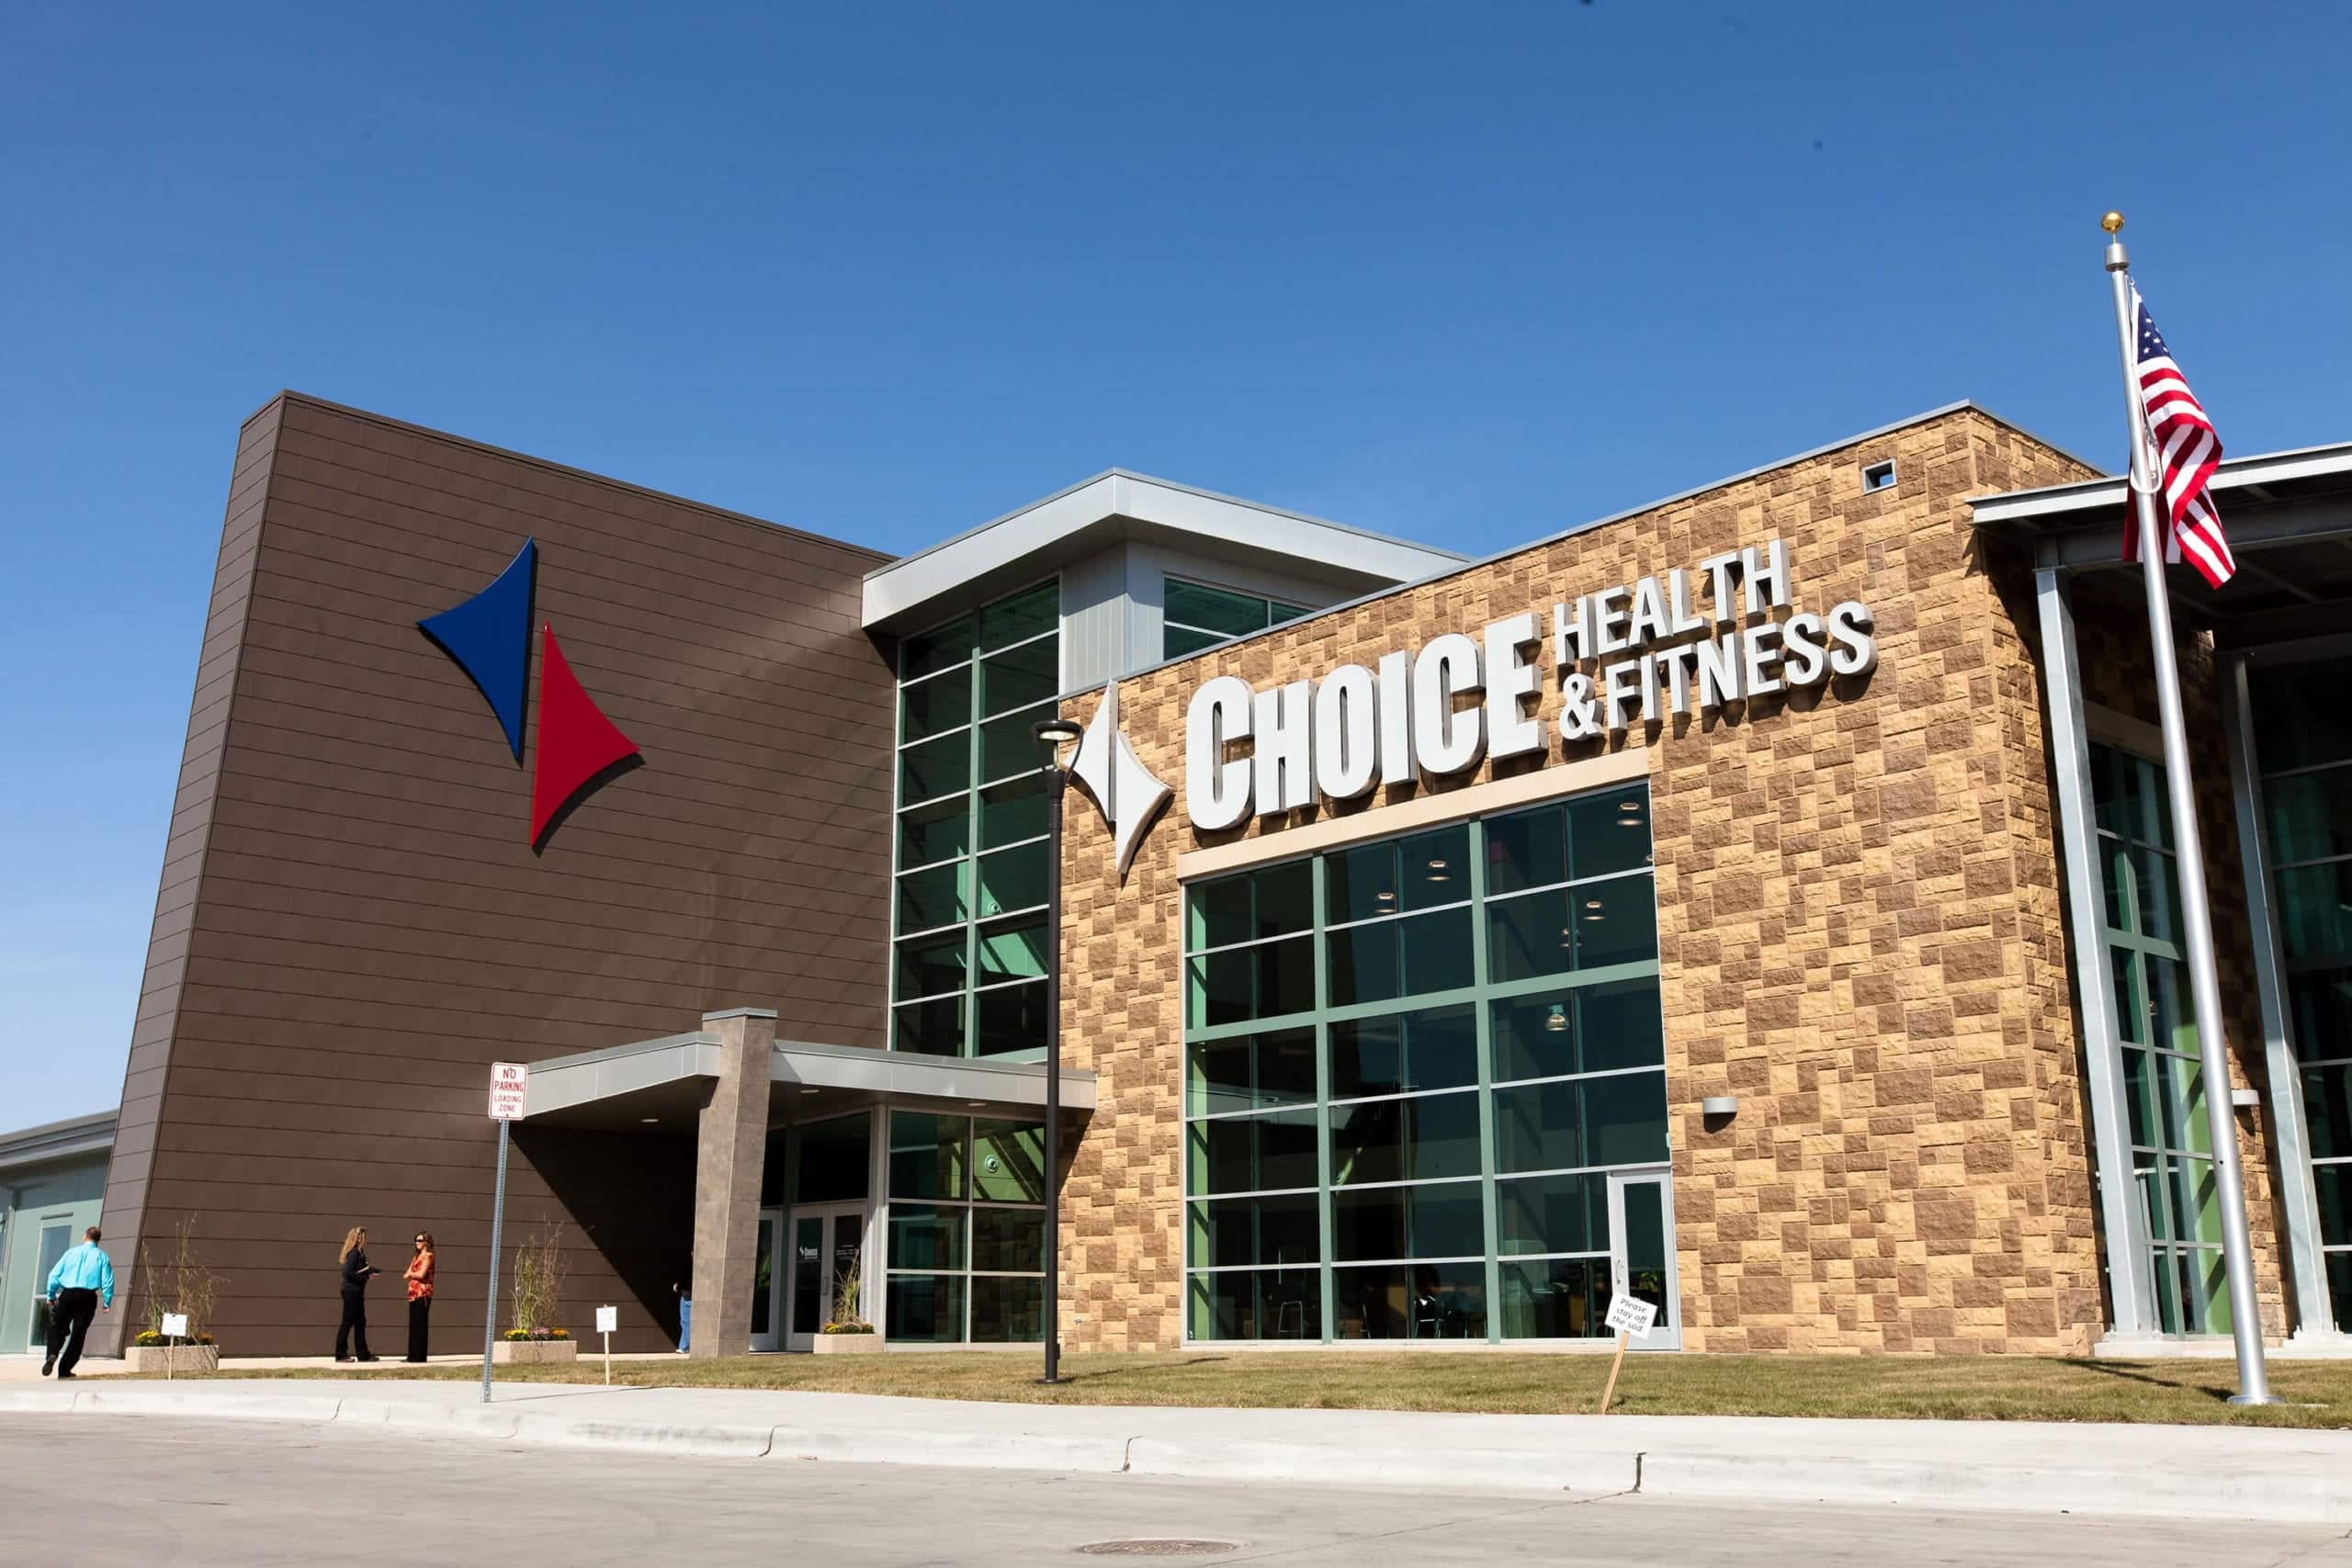 An exterior image of the Choice Health and Wellness Center in Grand Forks, ND